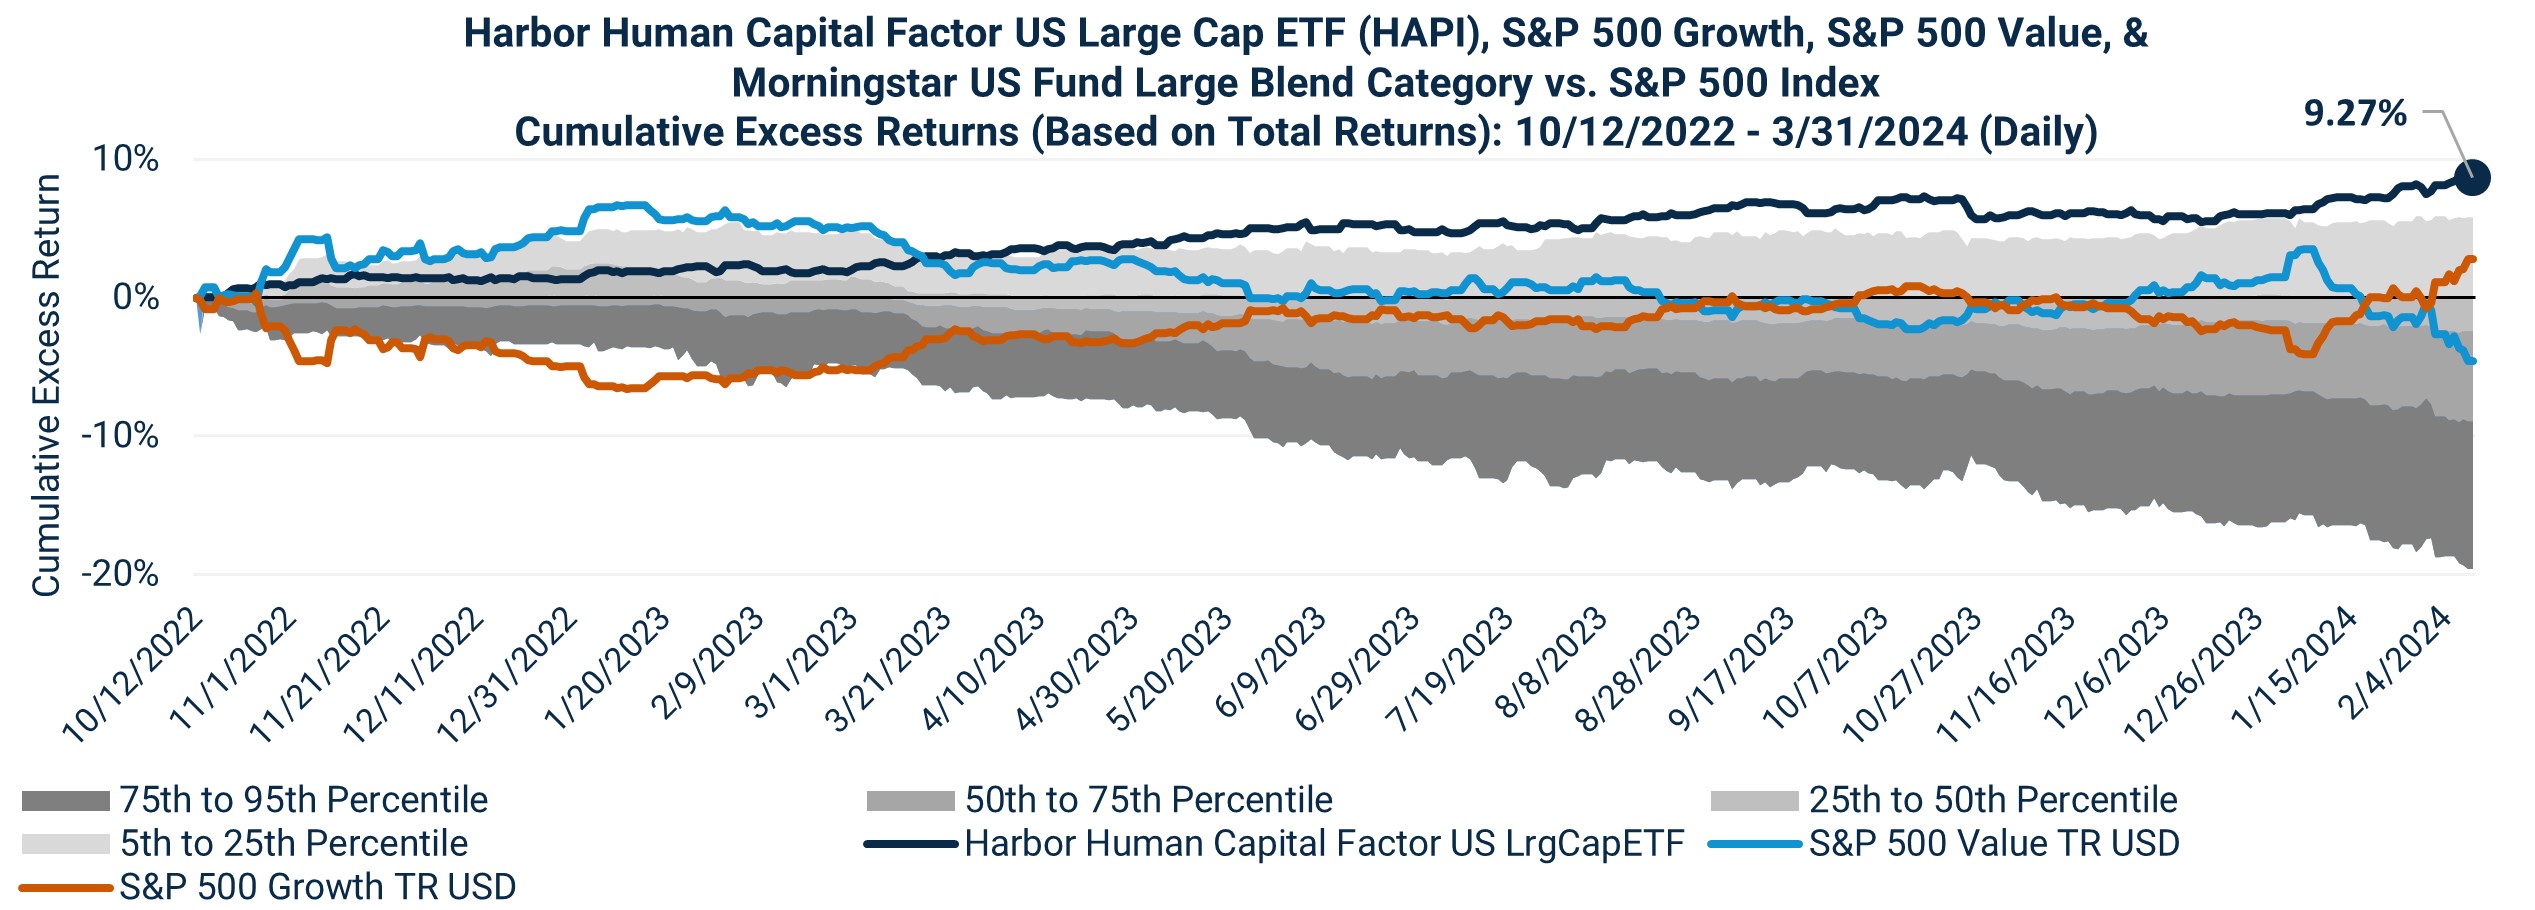 Harbor Human Capital Factor US Large Cap ETF (HAPI), S&P 500 Growth, S&P 500 Value, & Morningstar US Fund Large Blend Category vs. S&P 500 Index Cumulative Excess Returns (Based on Total Returns): 10/12/2022 - 3/31/2024 (Daily)